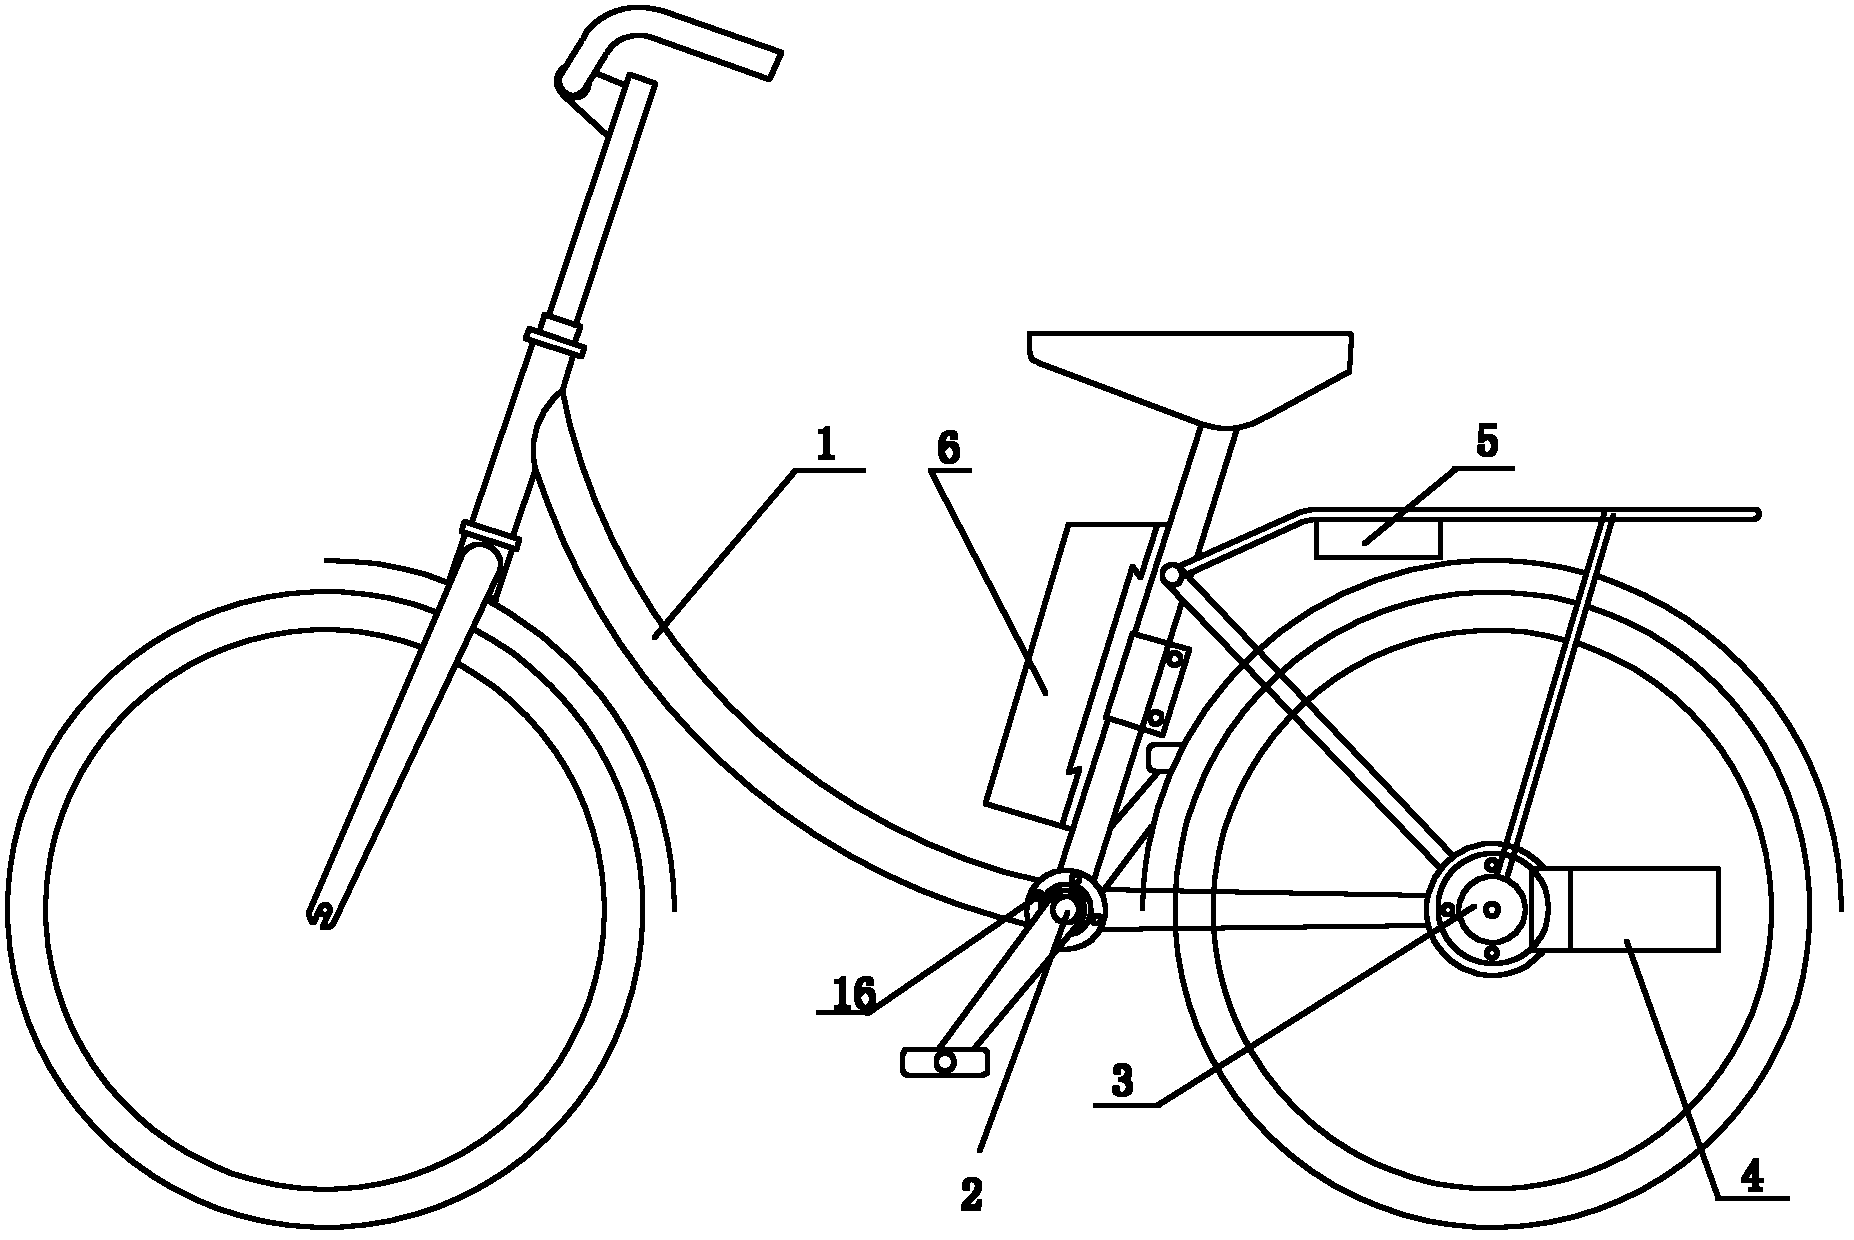 Power-assisted bicycle driven by lithium battery